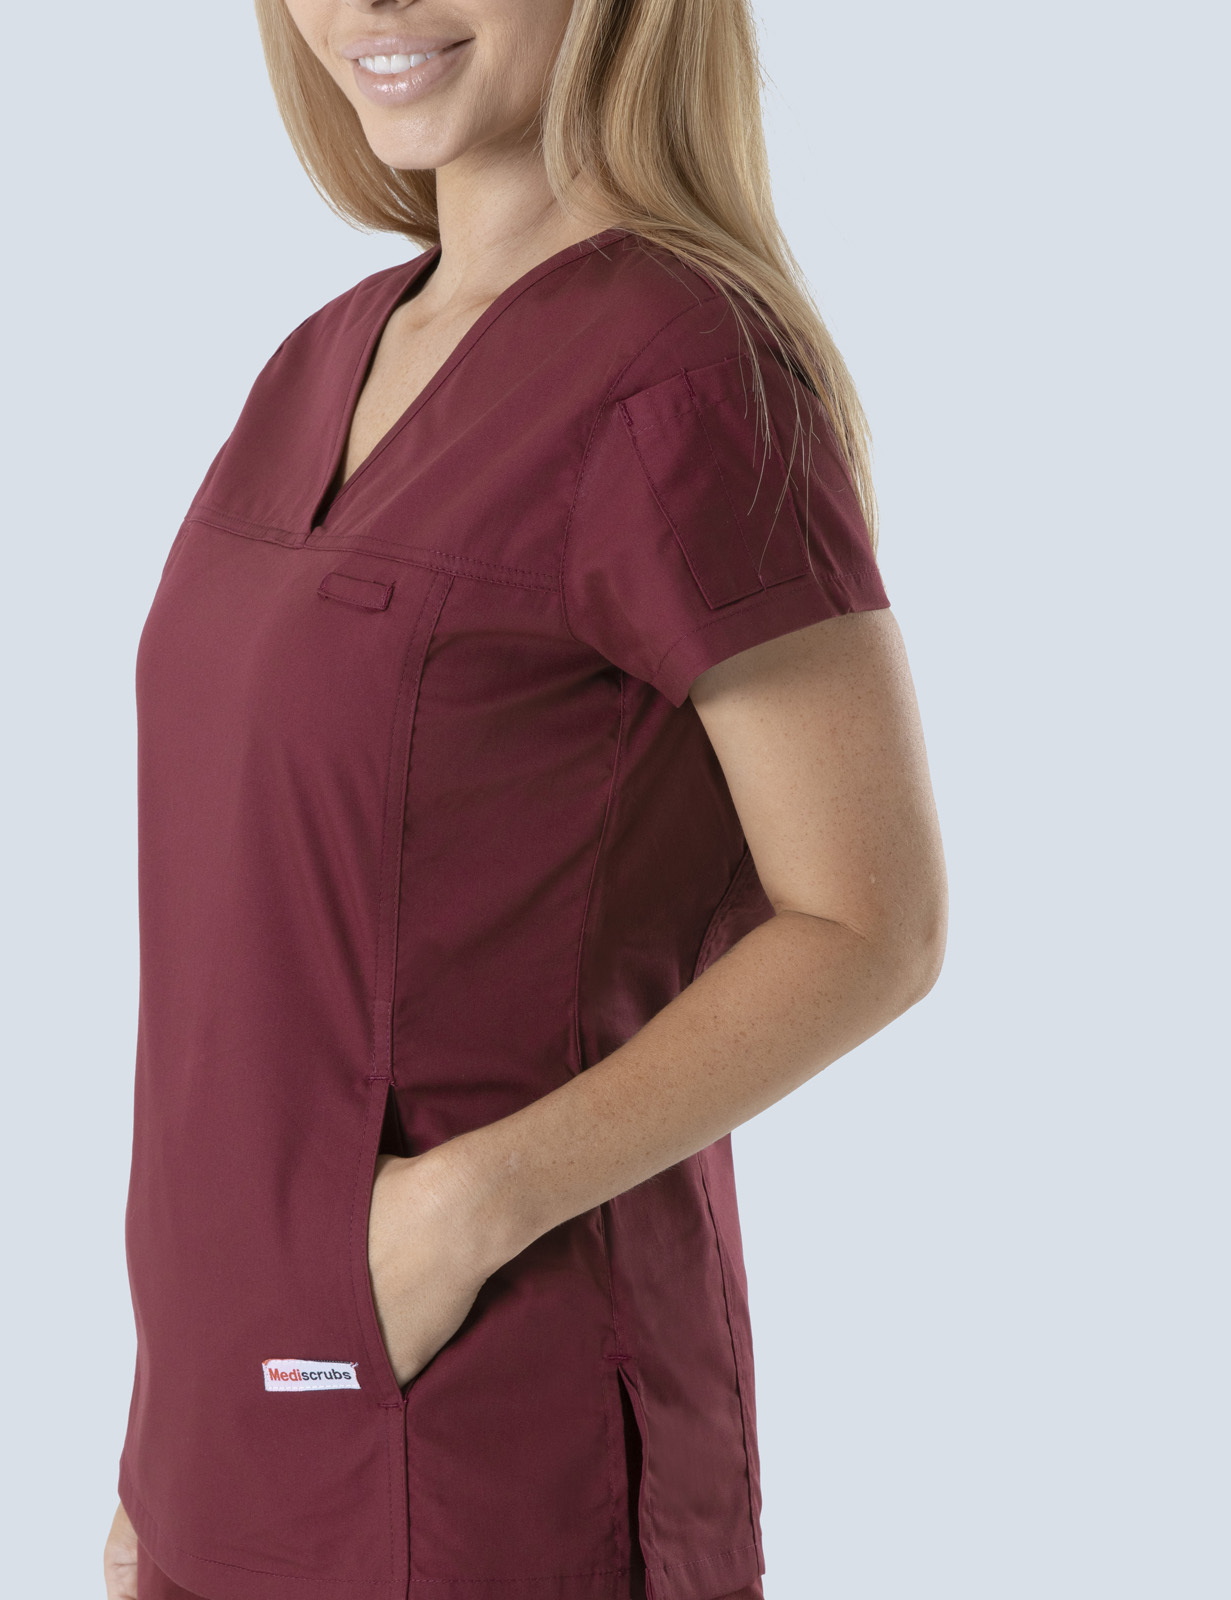 Mayfield Aged Care Registered Nurses Uniform Top Only Bundle (Women's Fit Top Solid in Burgundy incl Logos)